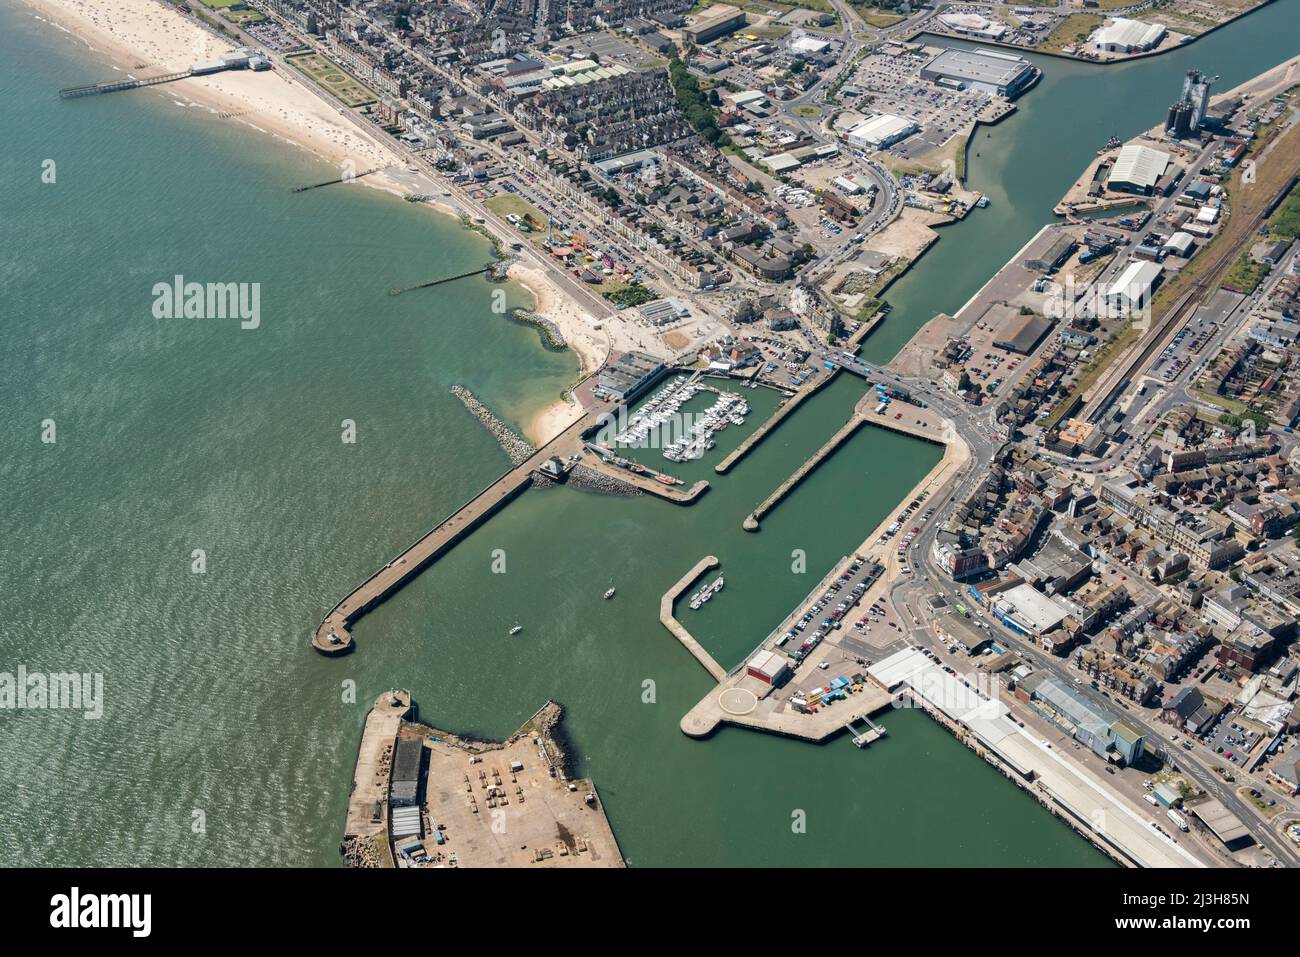 The harbour, town and High Street Heritage Action Zone, Lowestoft, Suffolk, 2016. Stock Photo